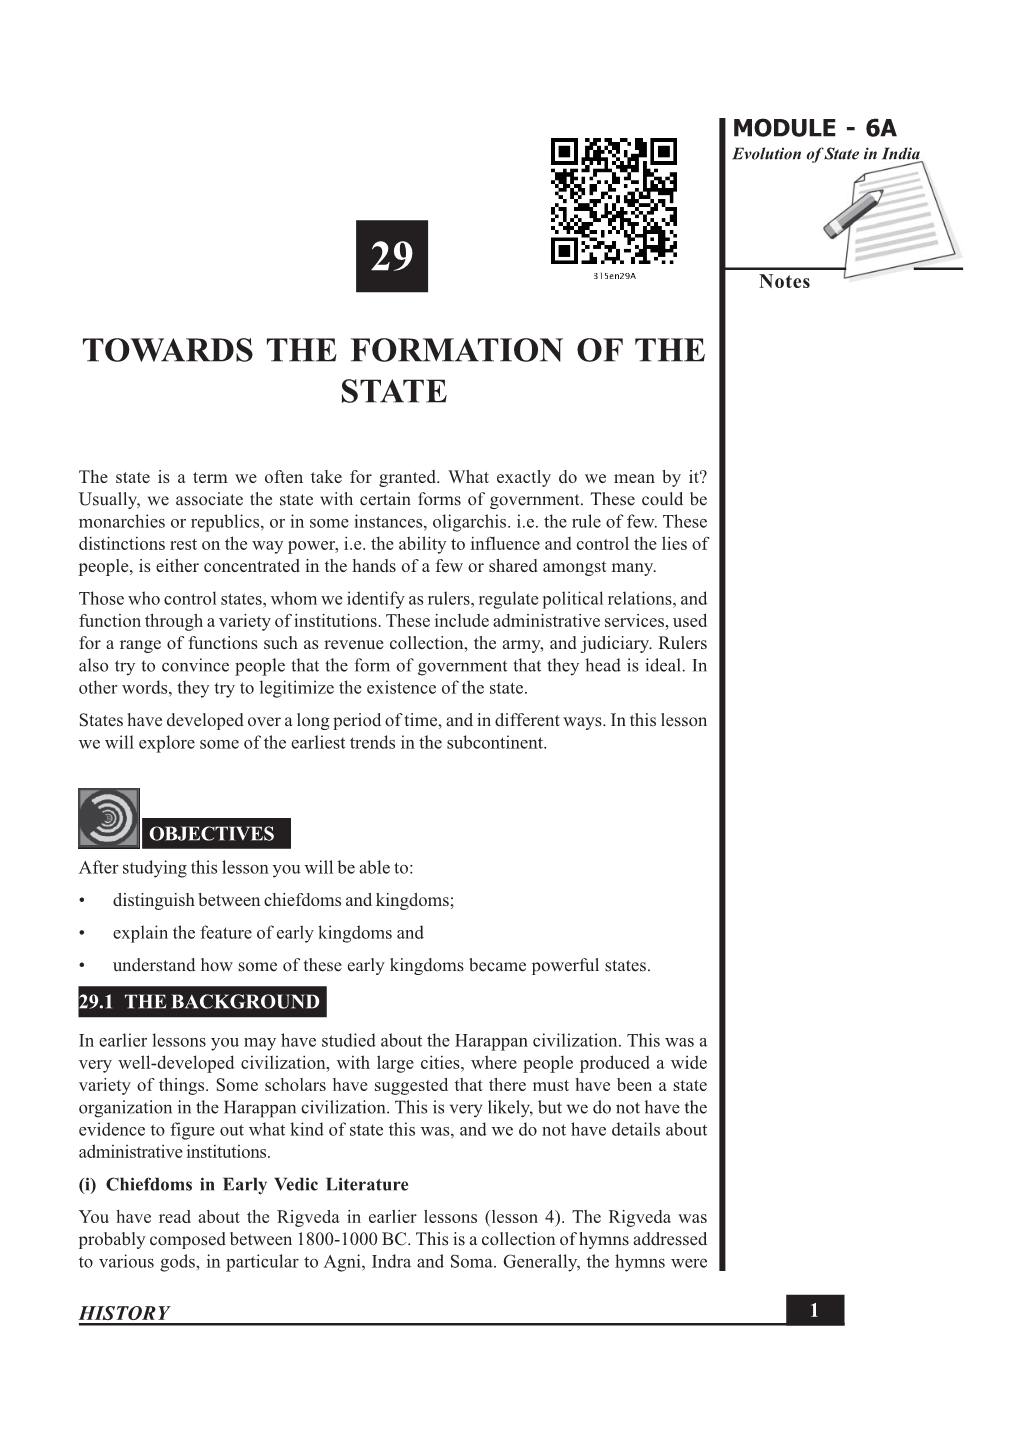 29A. Towards Formation of State